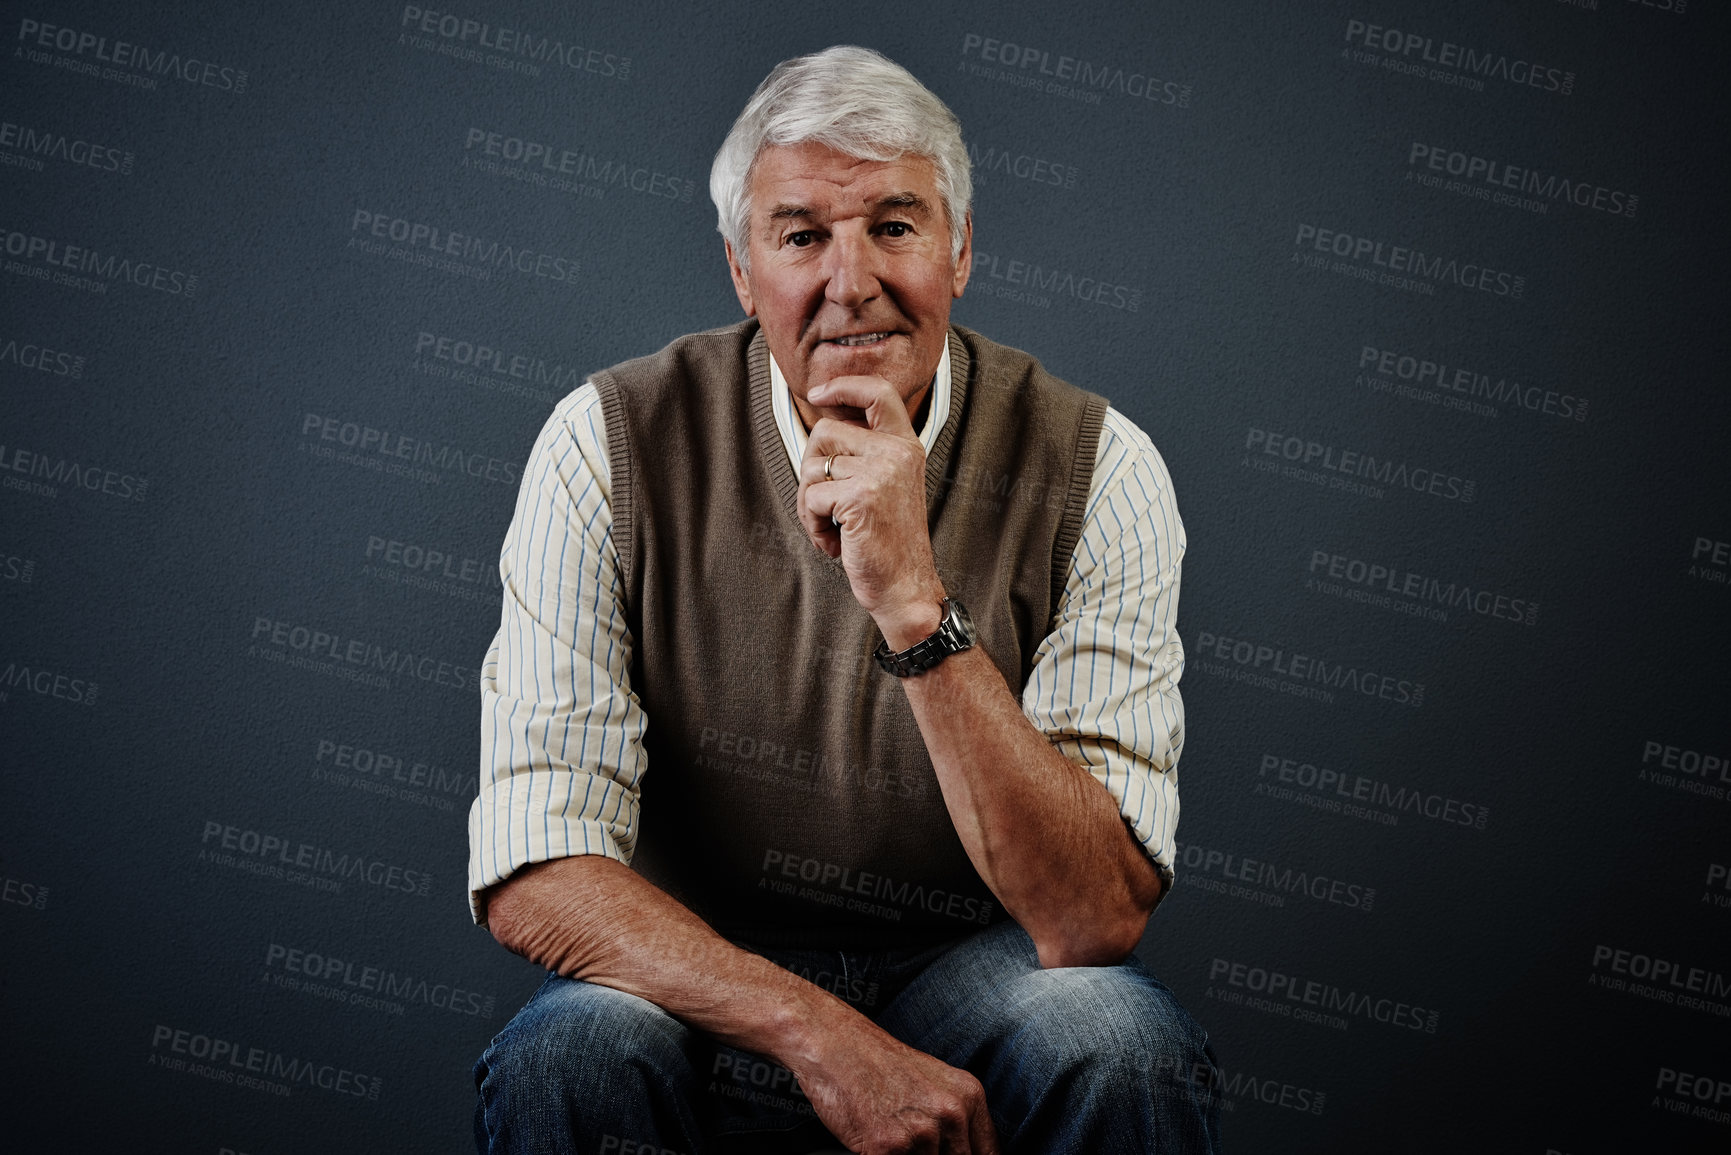 Buy stock photo Studio portrait of a handsome mature man looking thoughtful while sitting on a stool against a dark background